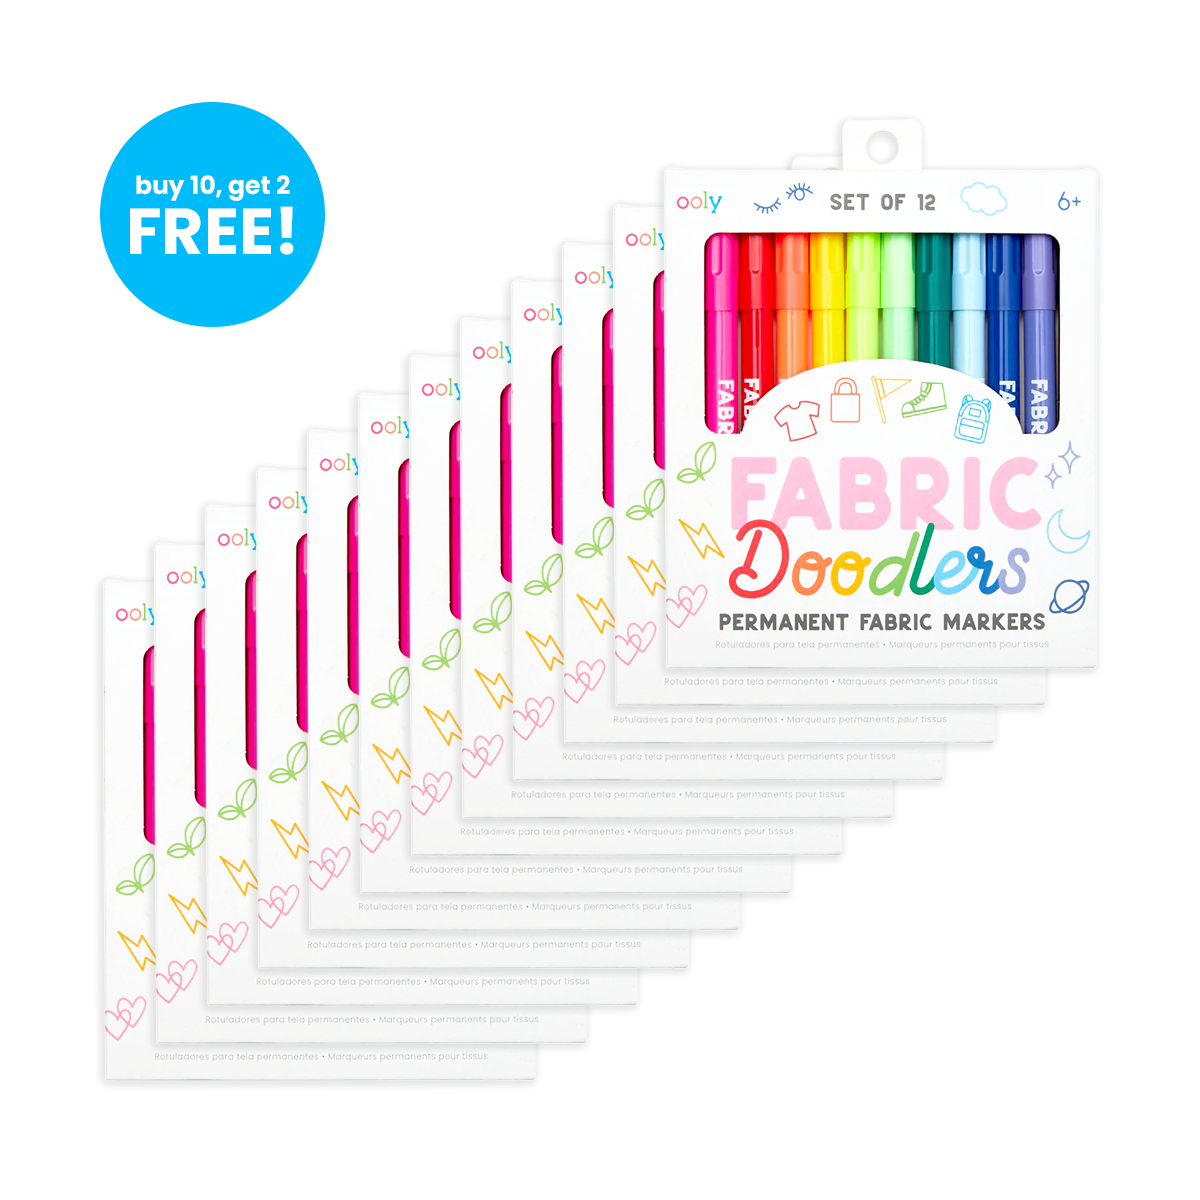 A bundle of 12 sets of Fabric Doodlers